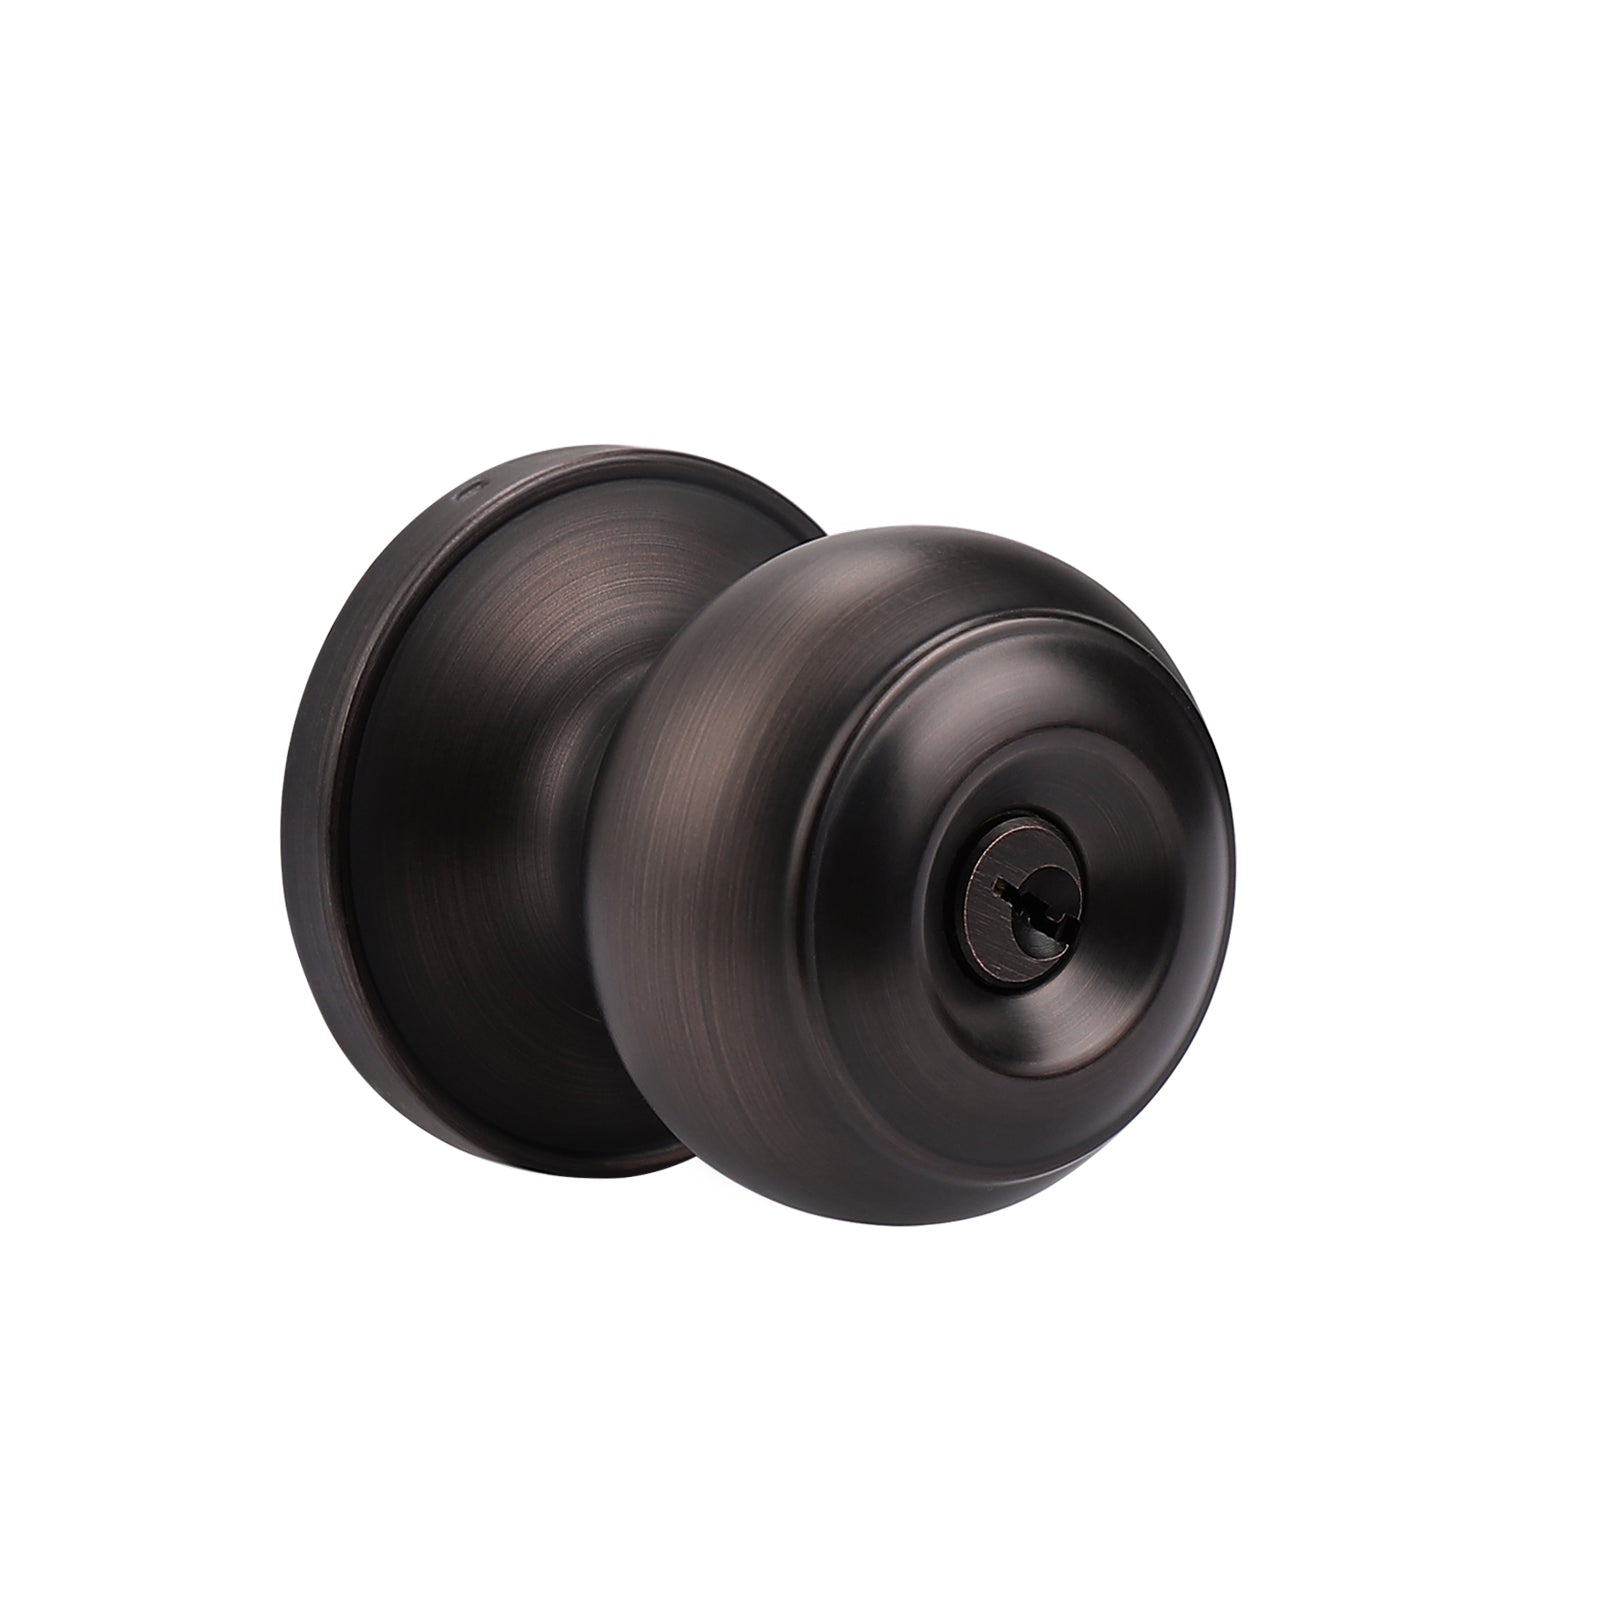 Door Lock Knobs Entrance/Passage/Dummy/Privacy Locks Oil Rubbed Bronze Finish DL609ORB